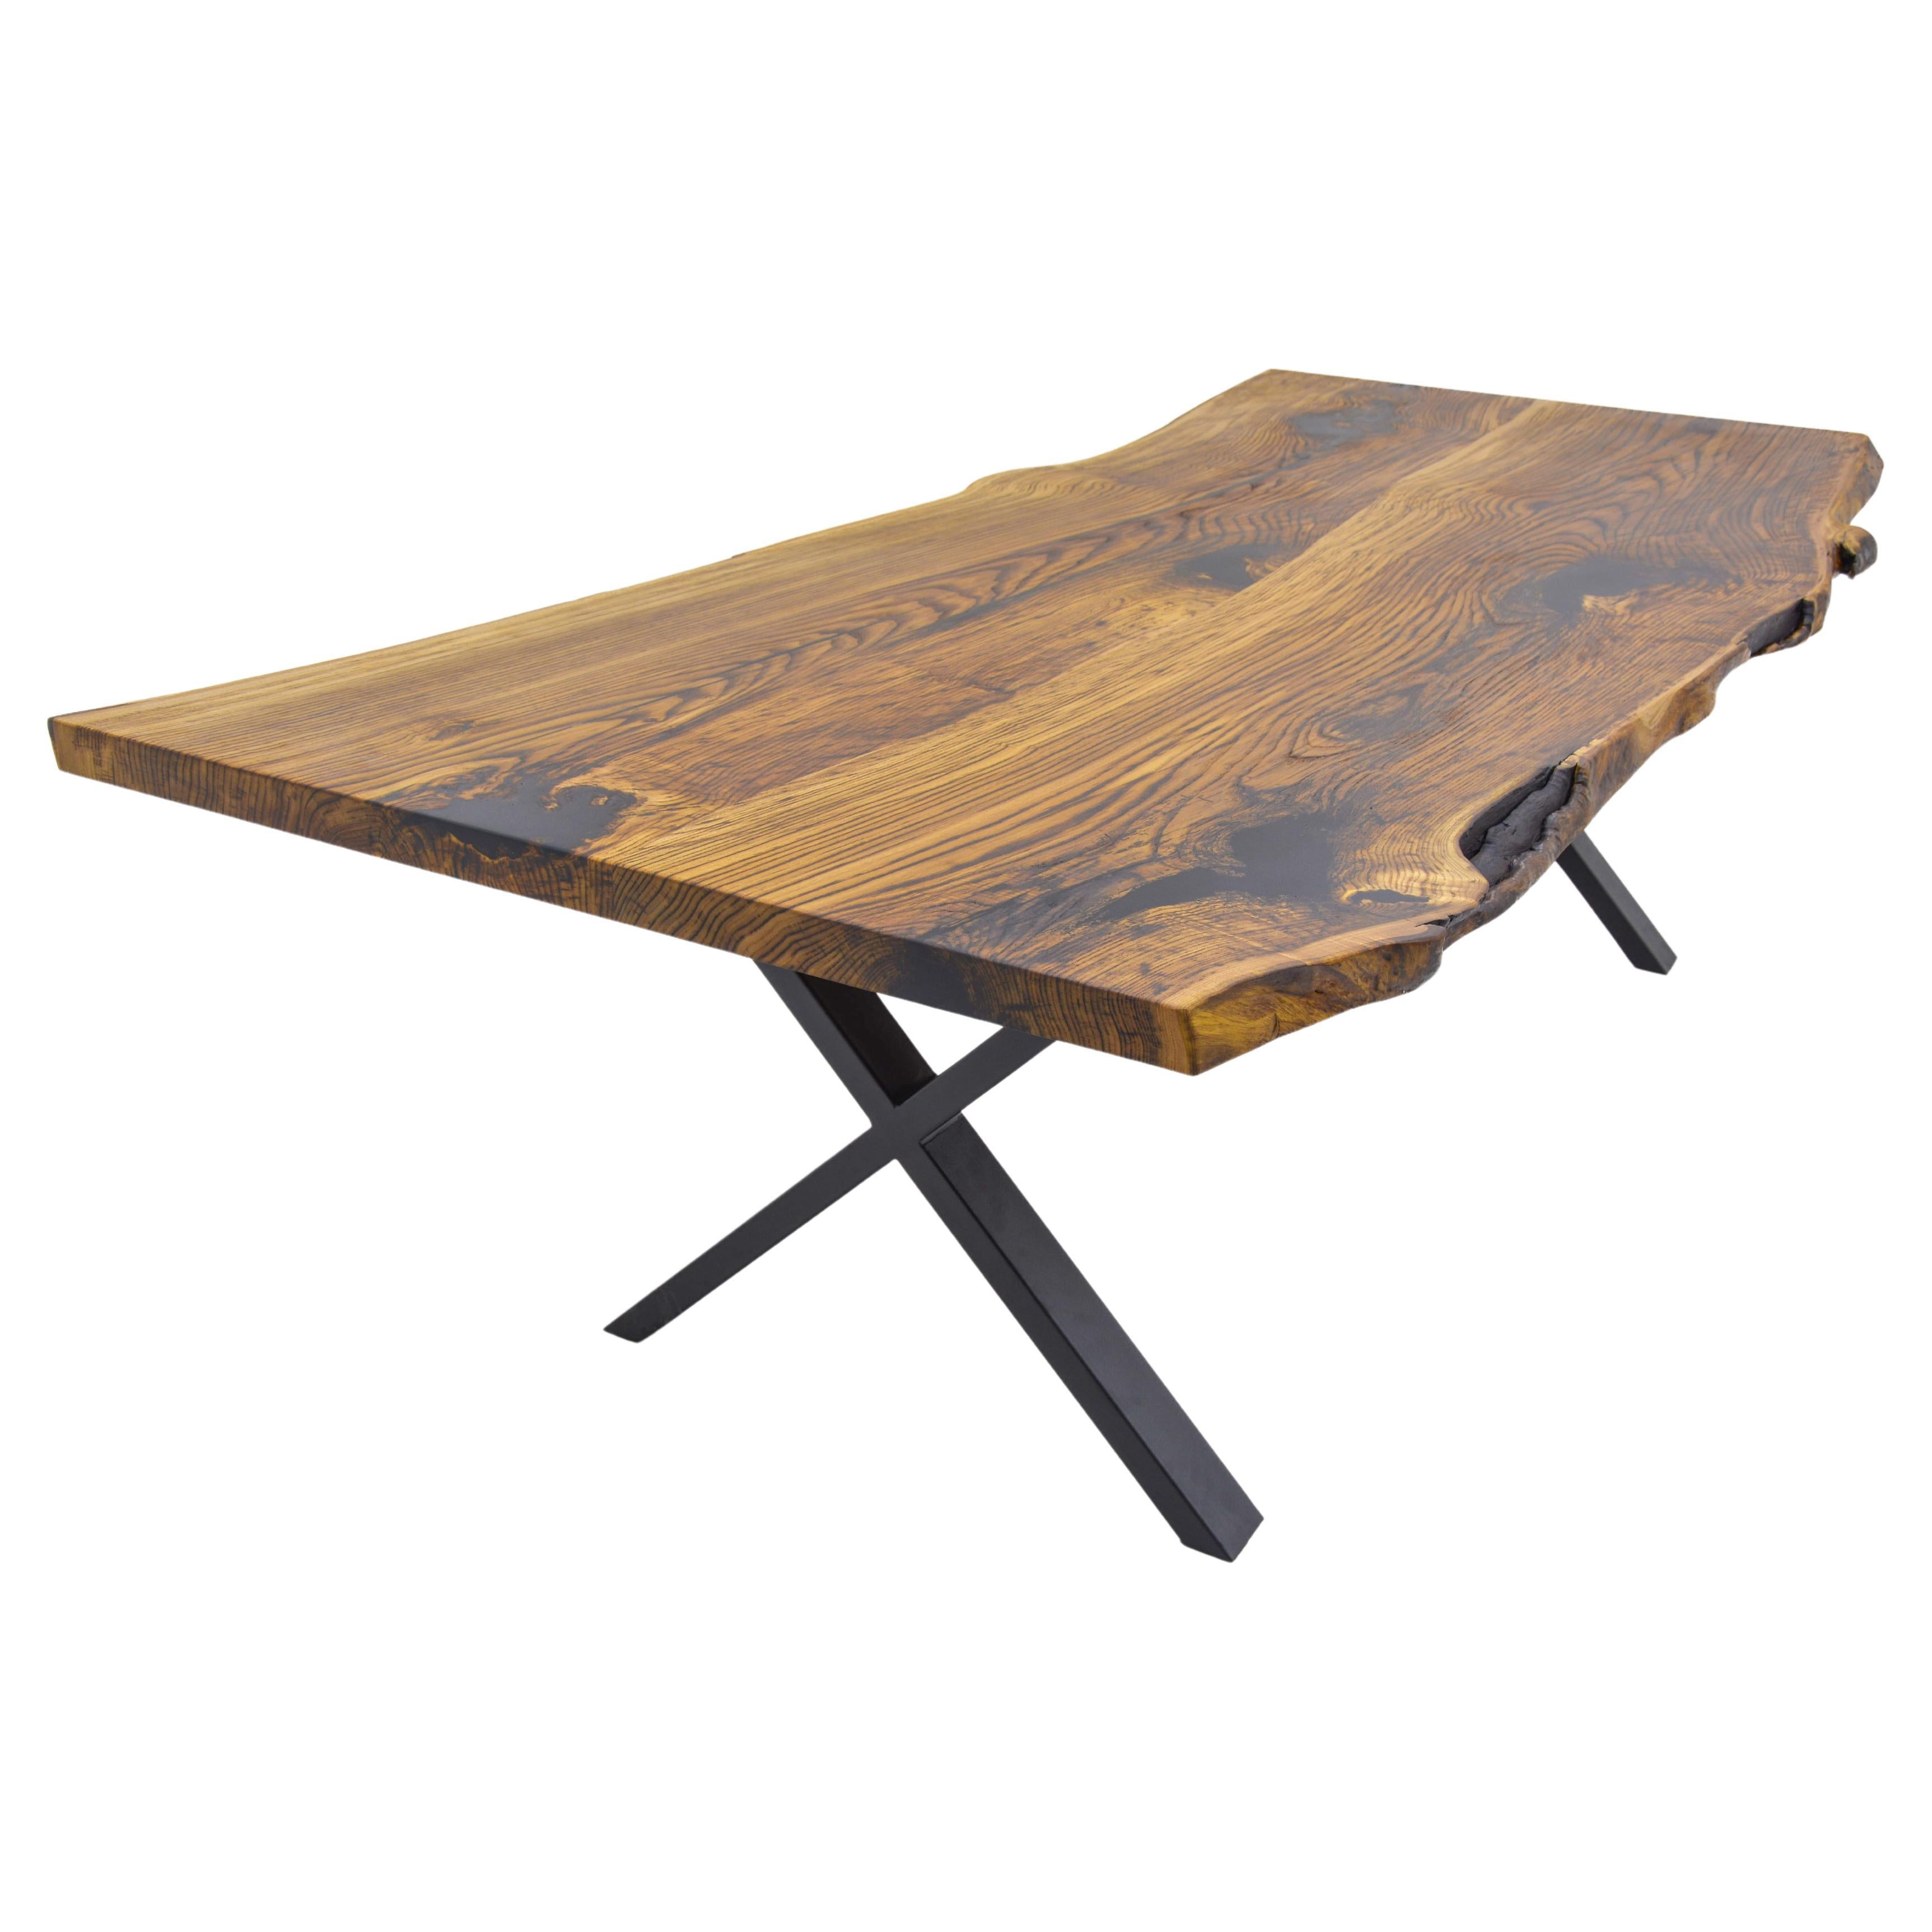 Custom Chestnut Live Edge Kitchen Table 

This table is made of Chestnut Wood. The grains and texture of the wood describe what a natural chestnut woods looks like.
It can be used as a dining table or as a conference table. Suitable for indoor